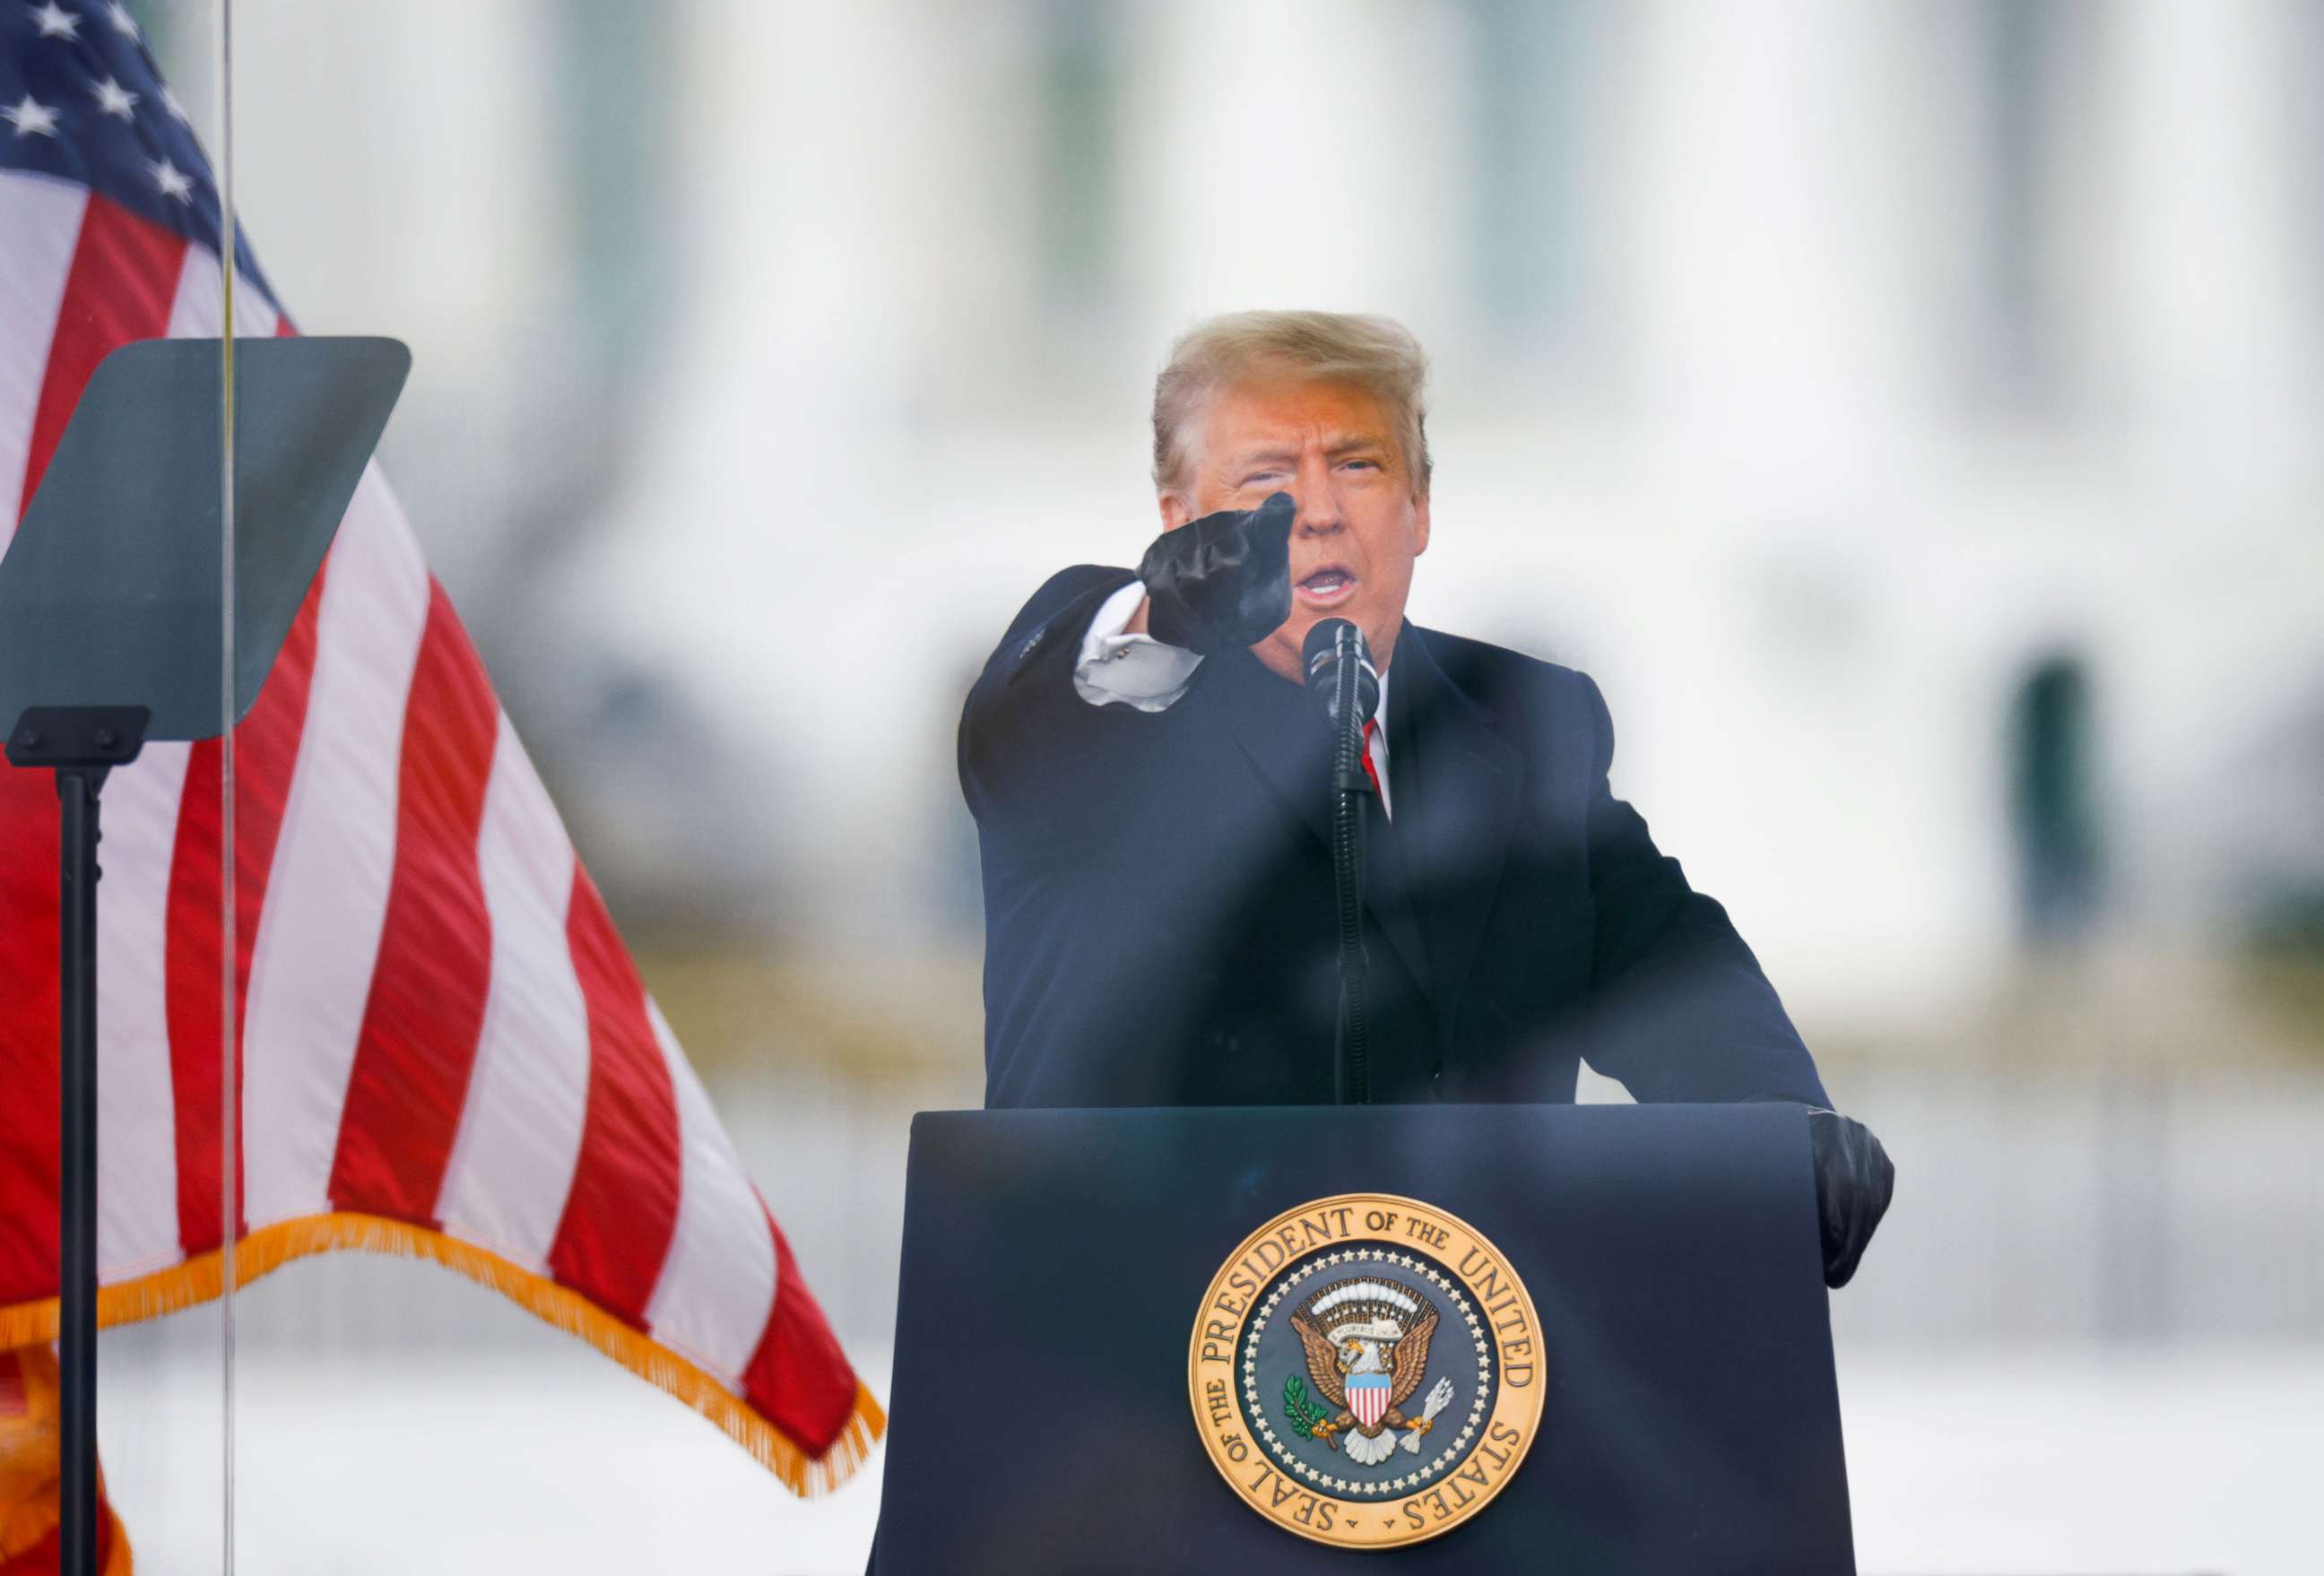 PHOTO: President Donald Trump gestures as he speaks during a rally to contest the certification of the 2020 U.S. presidential election results by the Congress, in Washington, Jan 6, 2021.